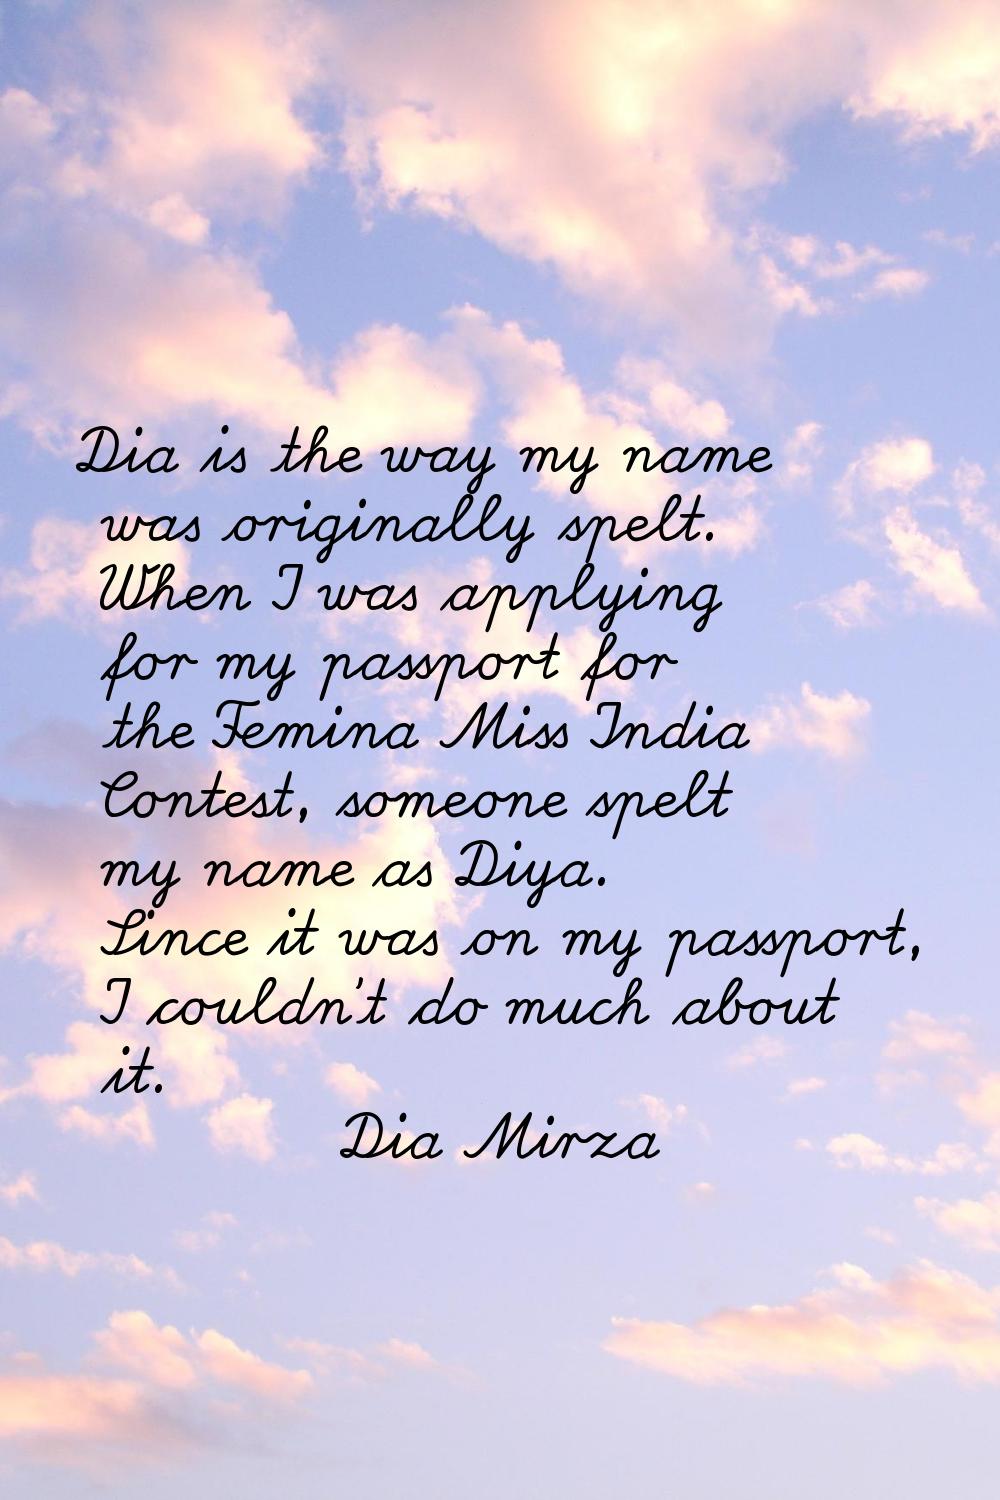 Dia is the way my name was originally spelt. When I was applying for my passport for the Femina Mis